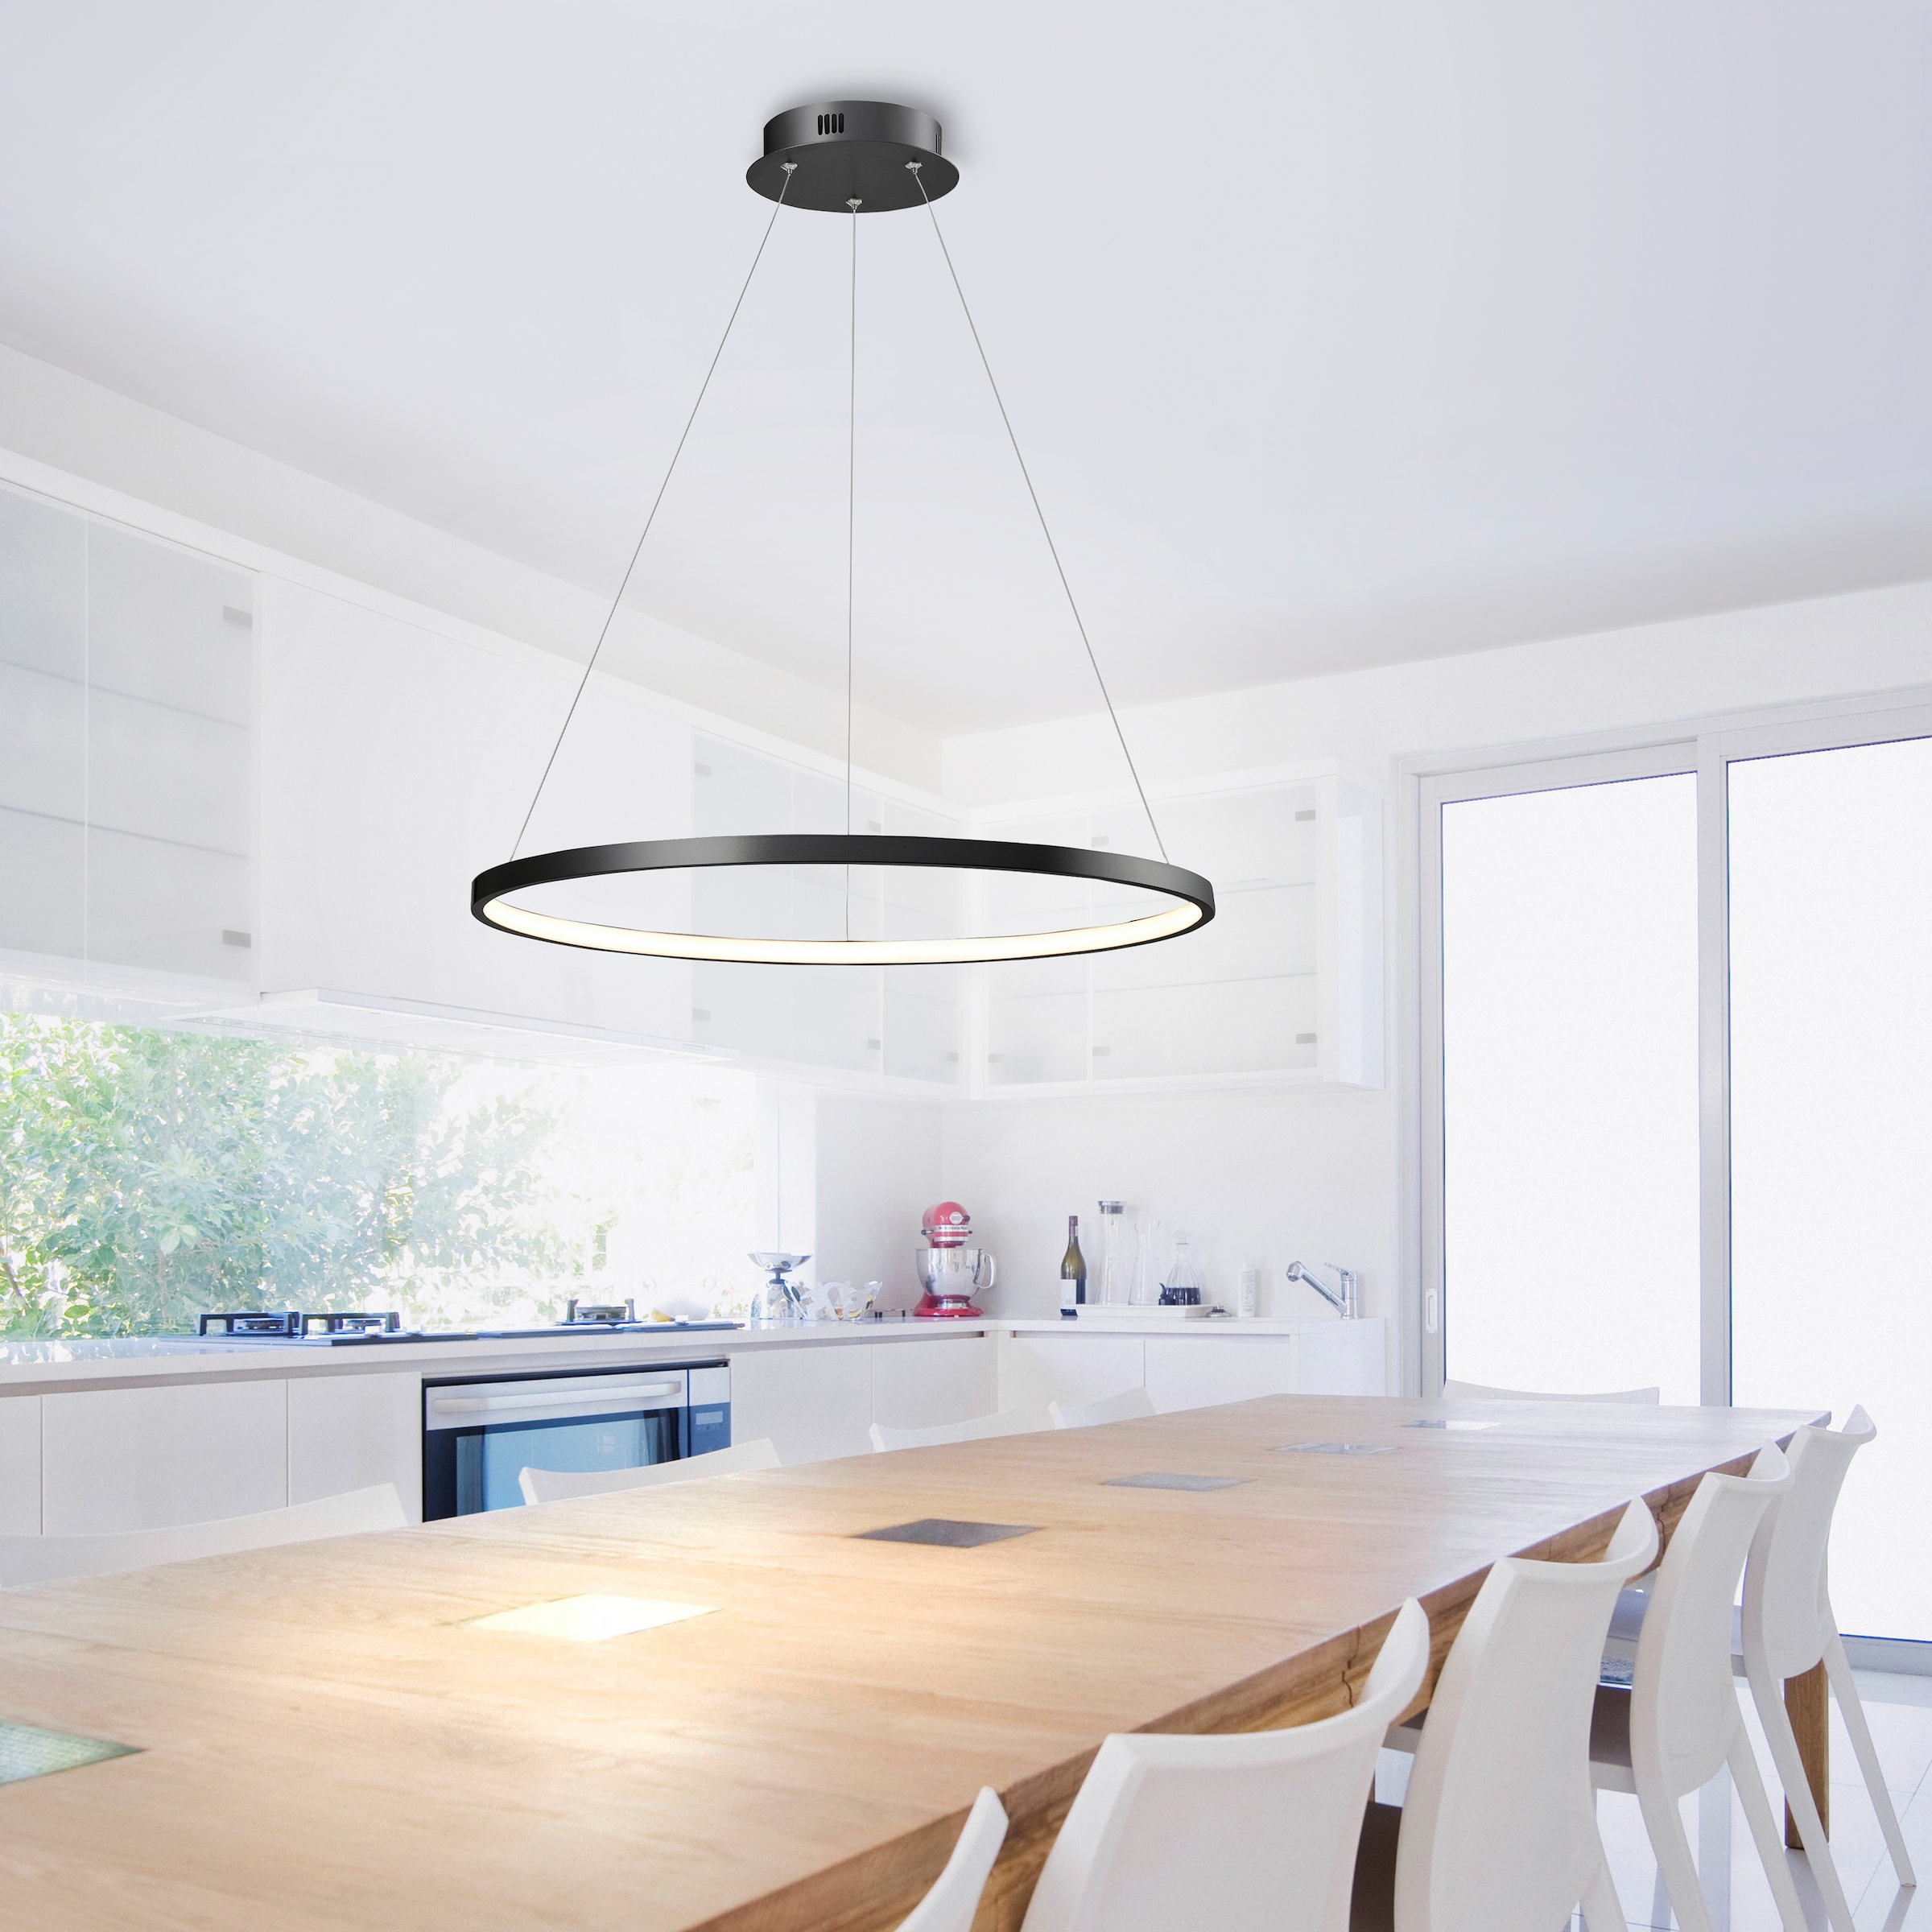 Places of flammig-flammig, Style Pendelleuchte modern LED kaufen 1 Hängelampe online »Raylan«, LED Ring